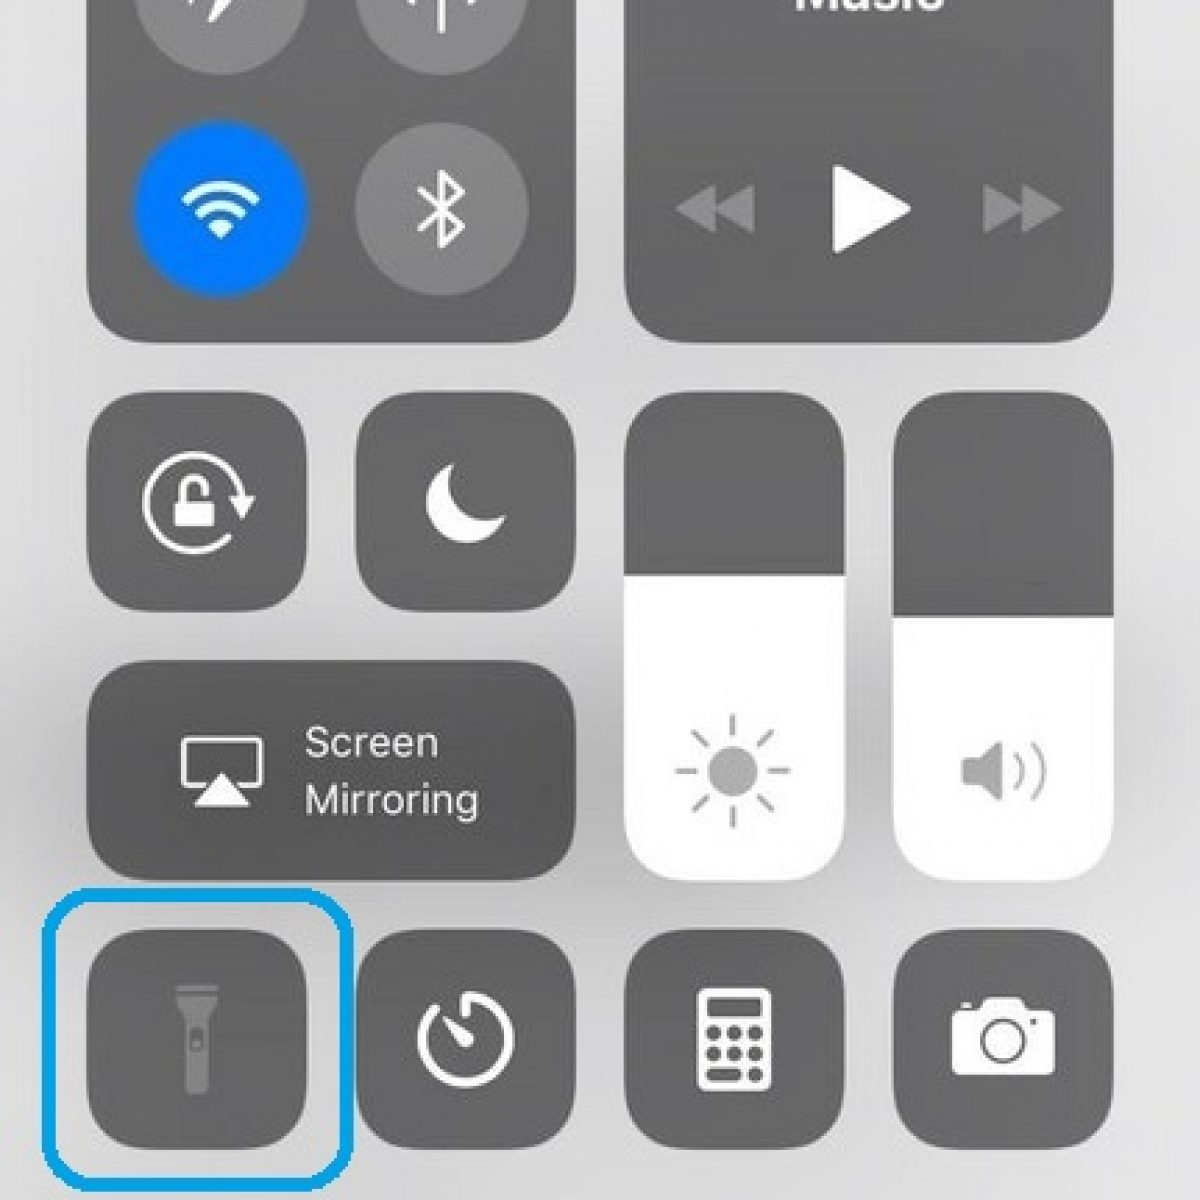 Flashlight on iPhone is not working